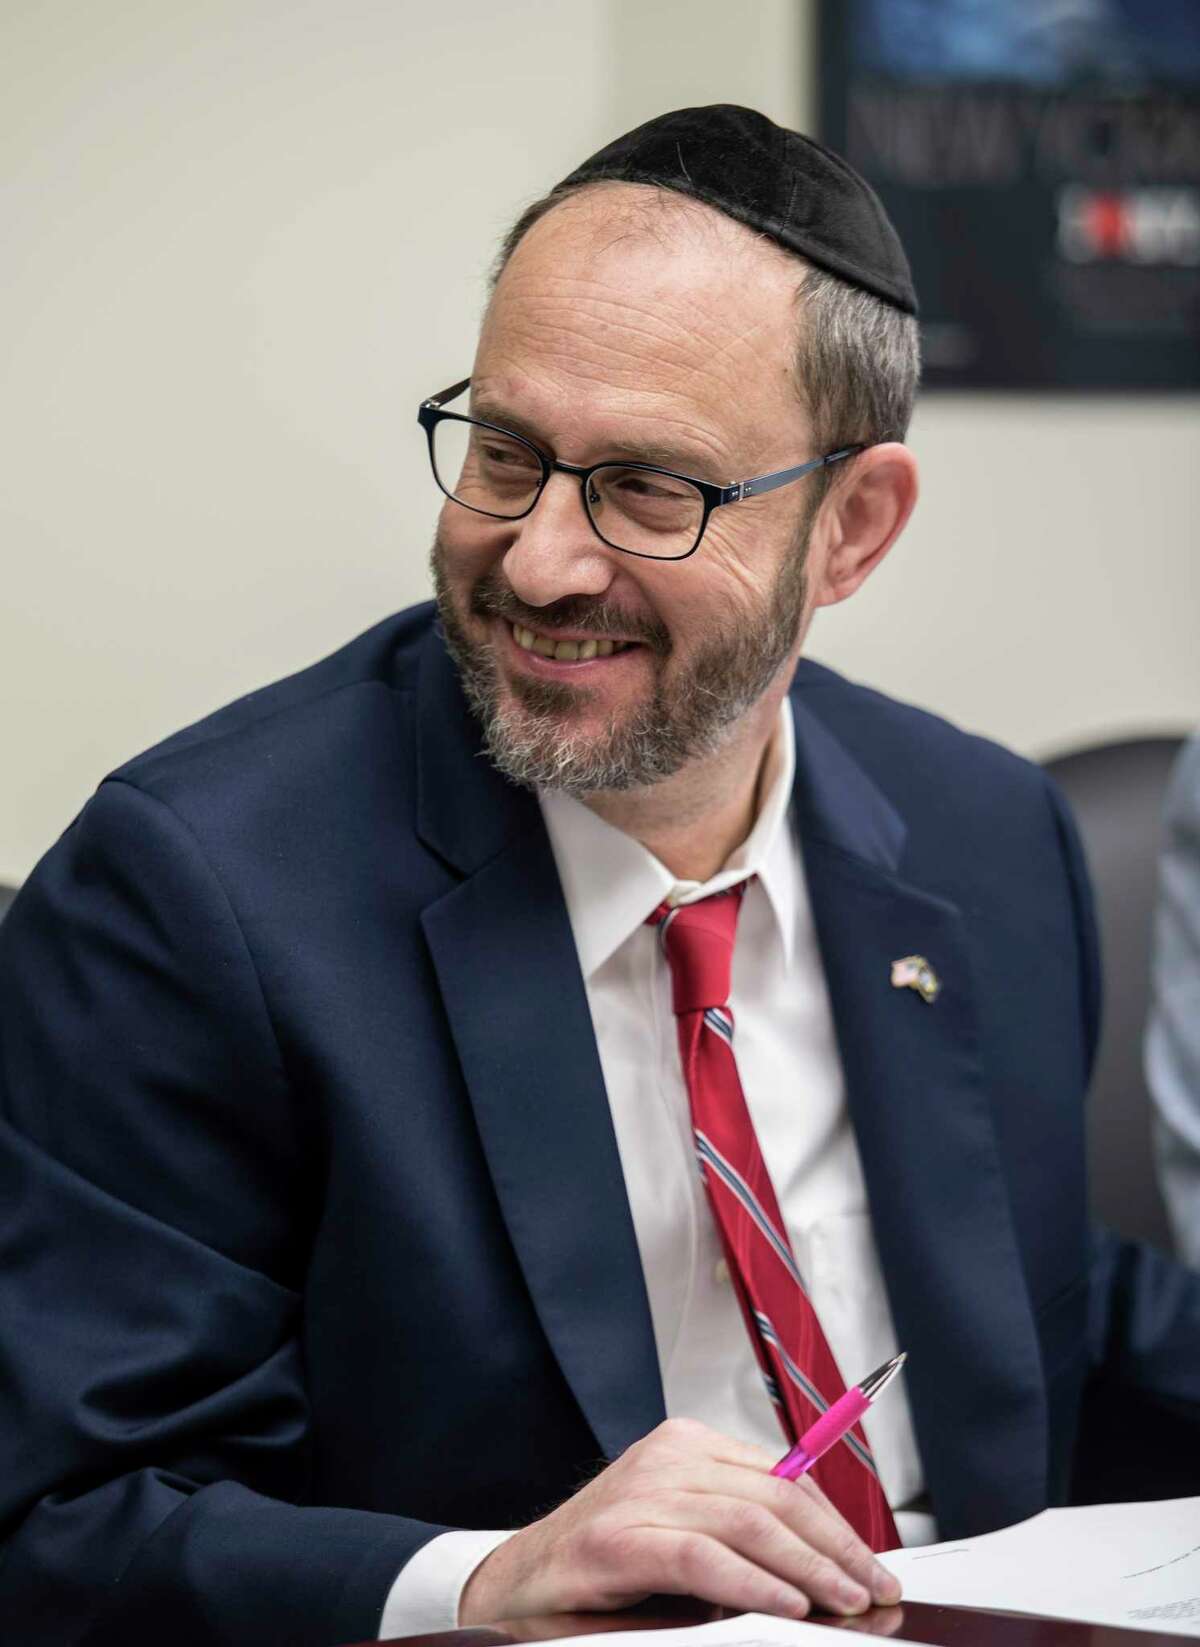 Senator Simcha Felder leads a committee meeting on Cities at the Legislative Office Building Thursday May 31, 2018 in Albany, N.Y. (Skip Dickstein/Times Union)